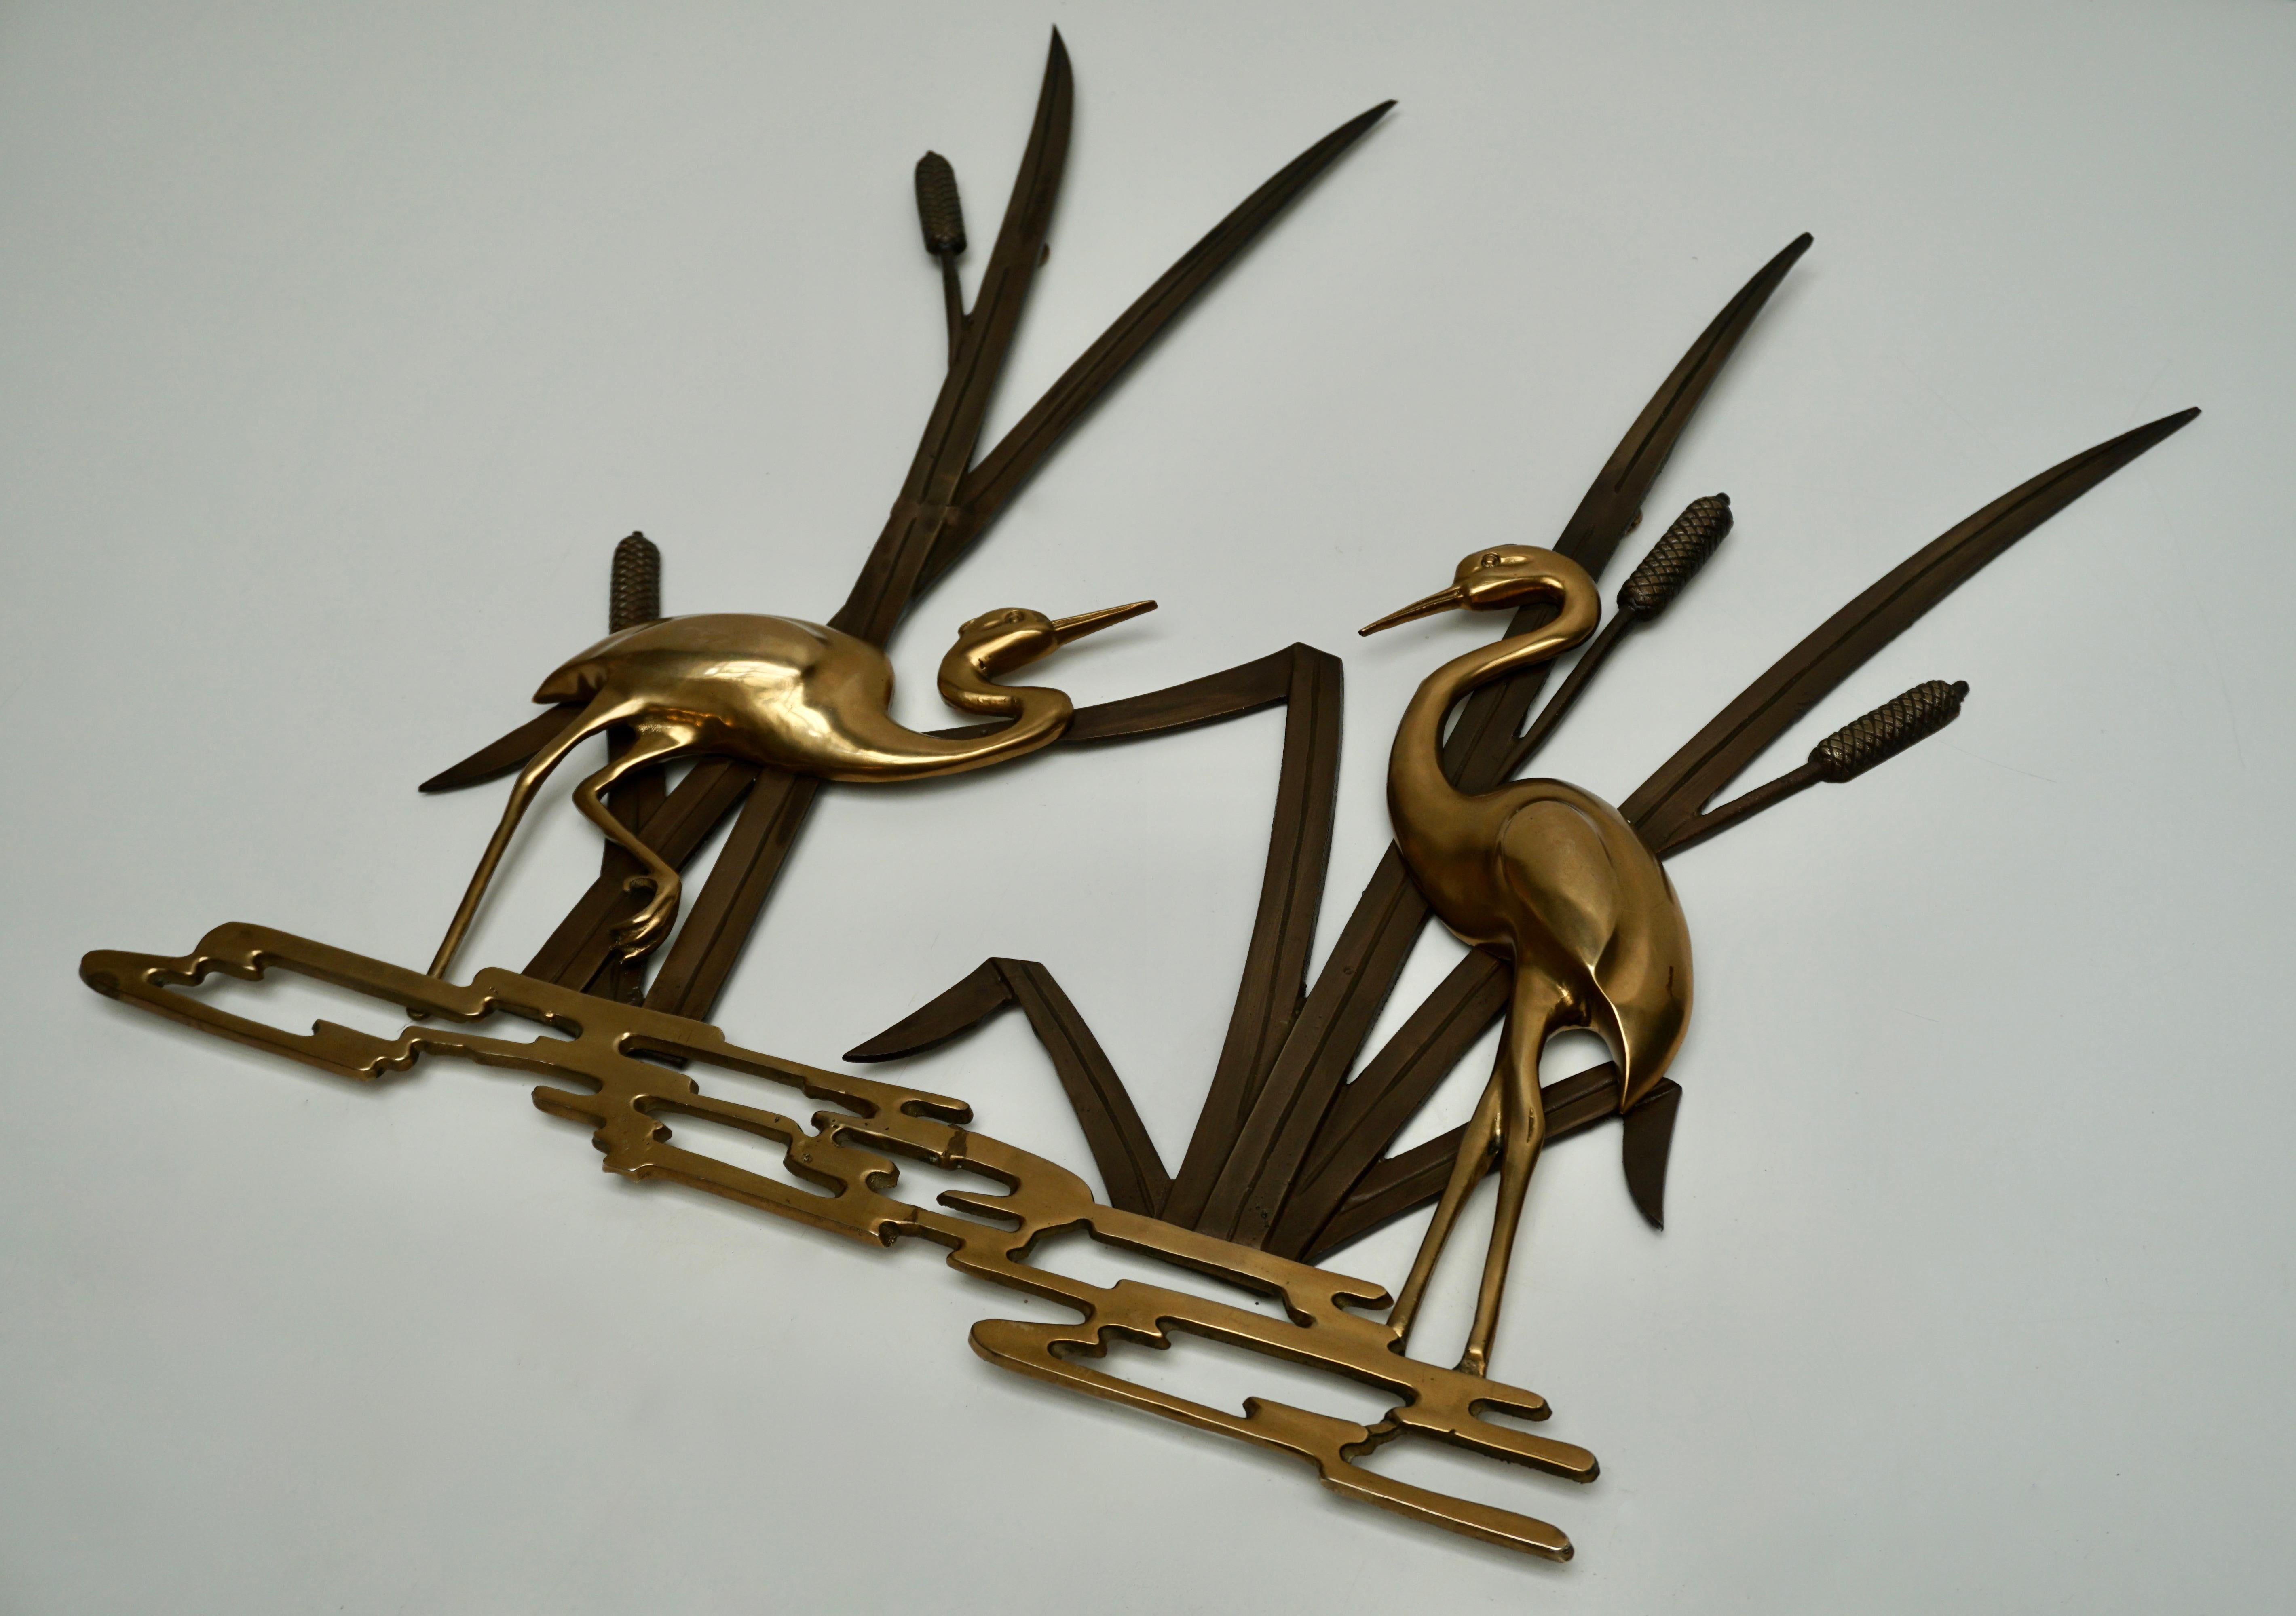 A beautiful vintage brass and bronze crane themed wall decoration. This decorative item would make a beautiful ornament on each wall.
Made in the 1960s it displays the joy of that great era with a bold, yet classy statement.